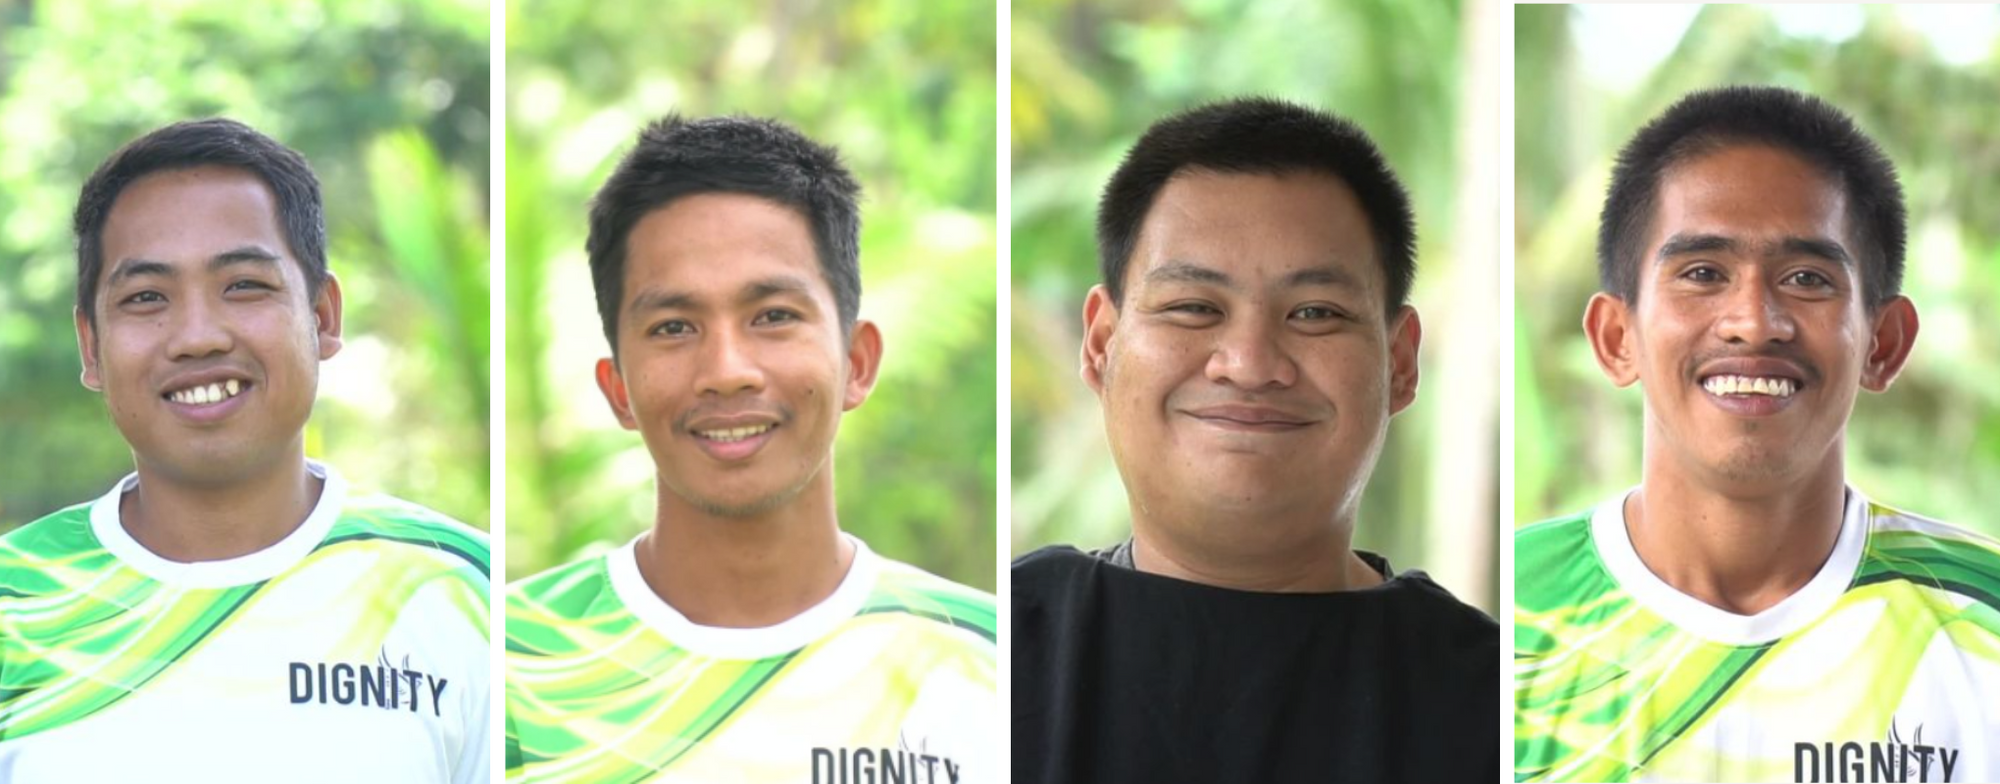 Meet 5 Dignity dads who transformed their families lives